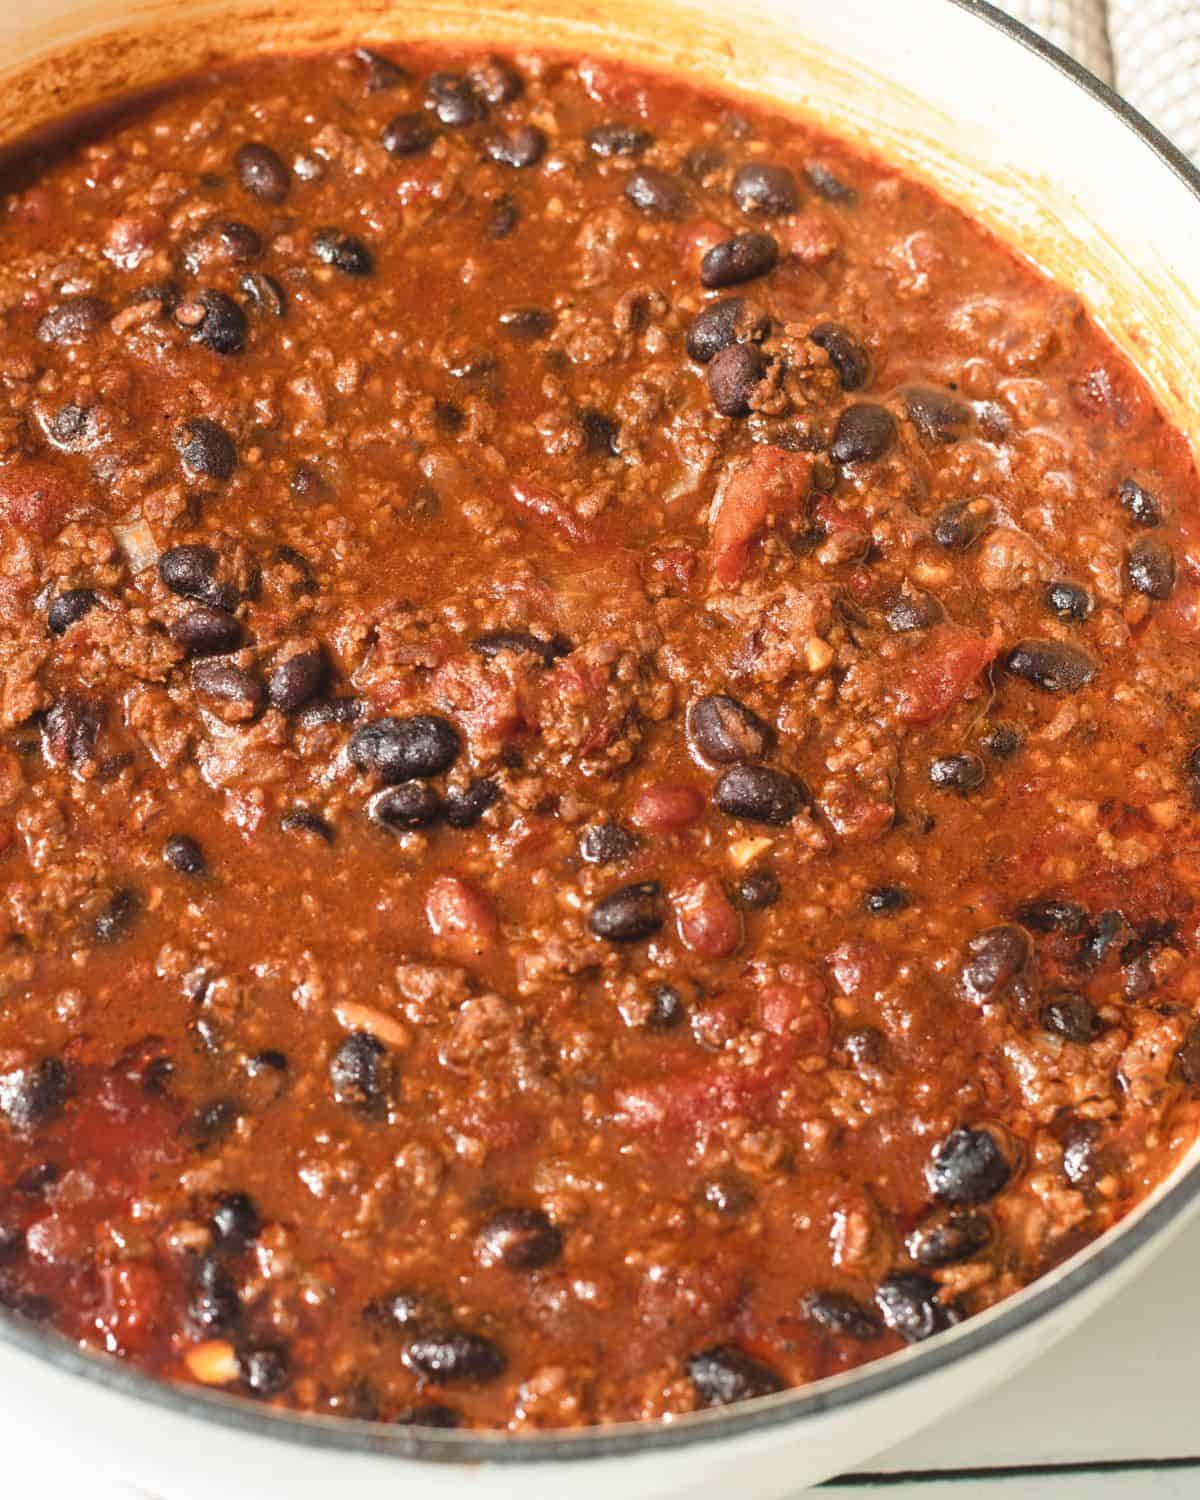 Chipotle chili with chipotle peppers in adobo sauce, black beans, ground beef in a red chili.